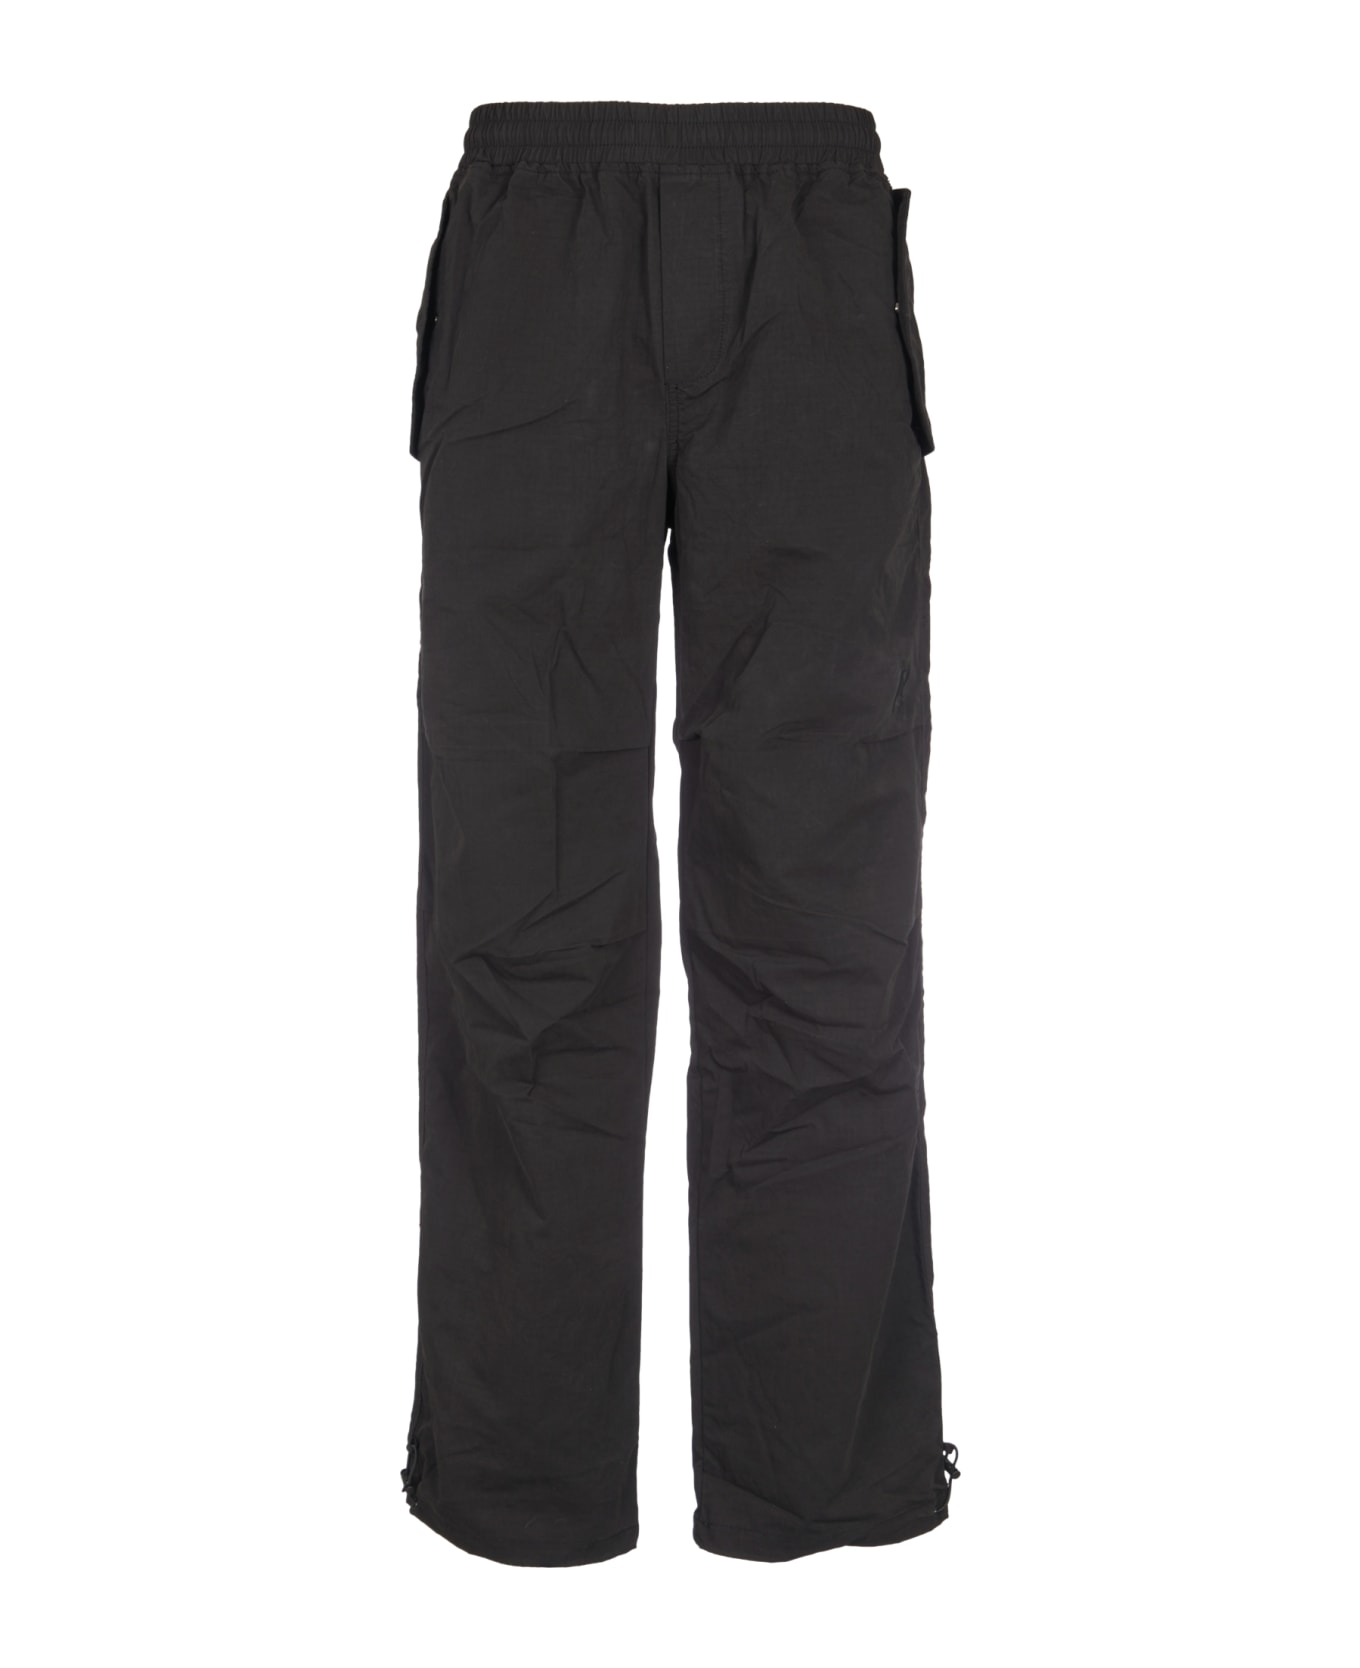 REPRESENT Buttoned Pocket Trousers - Black